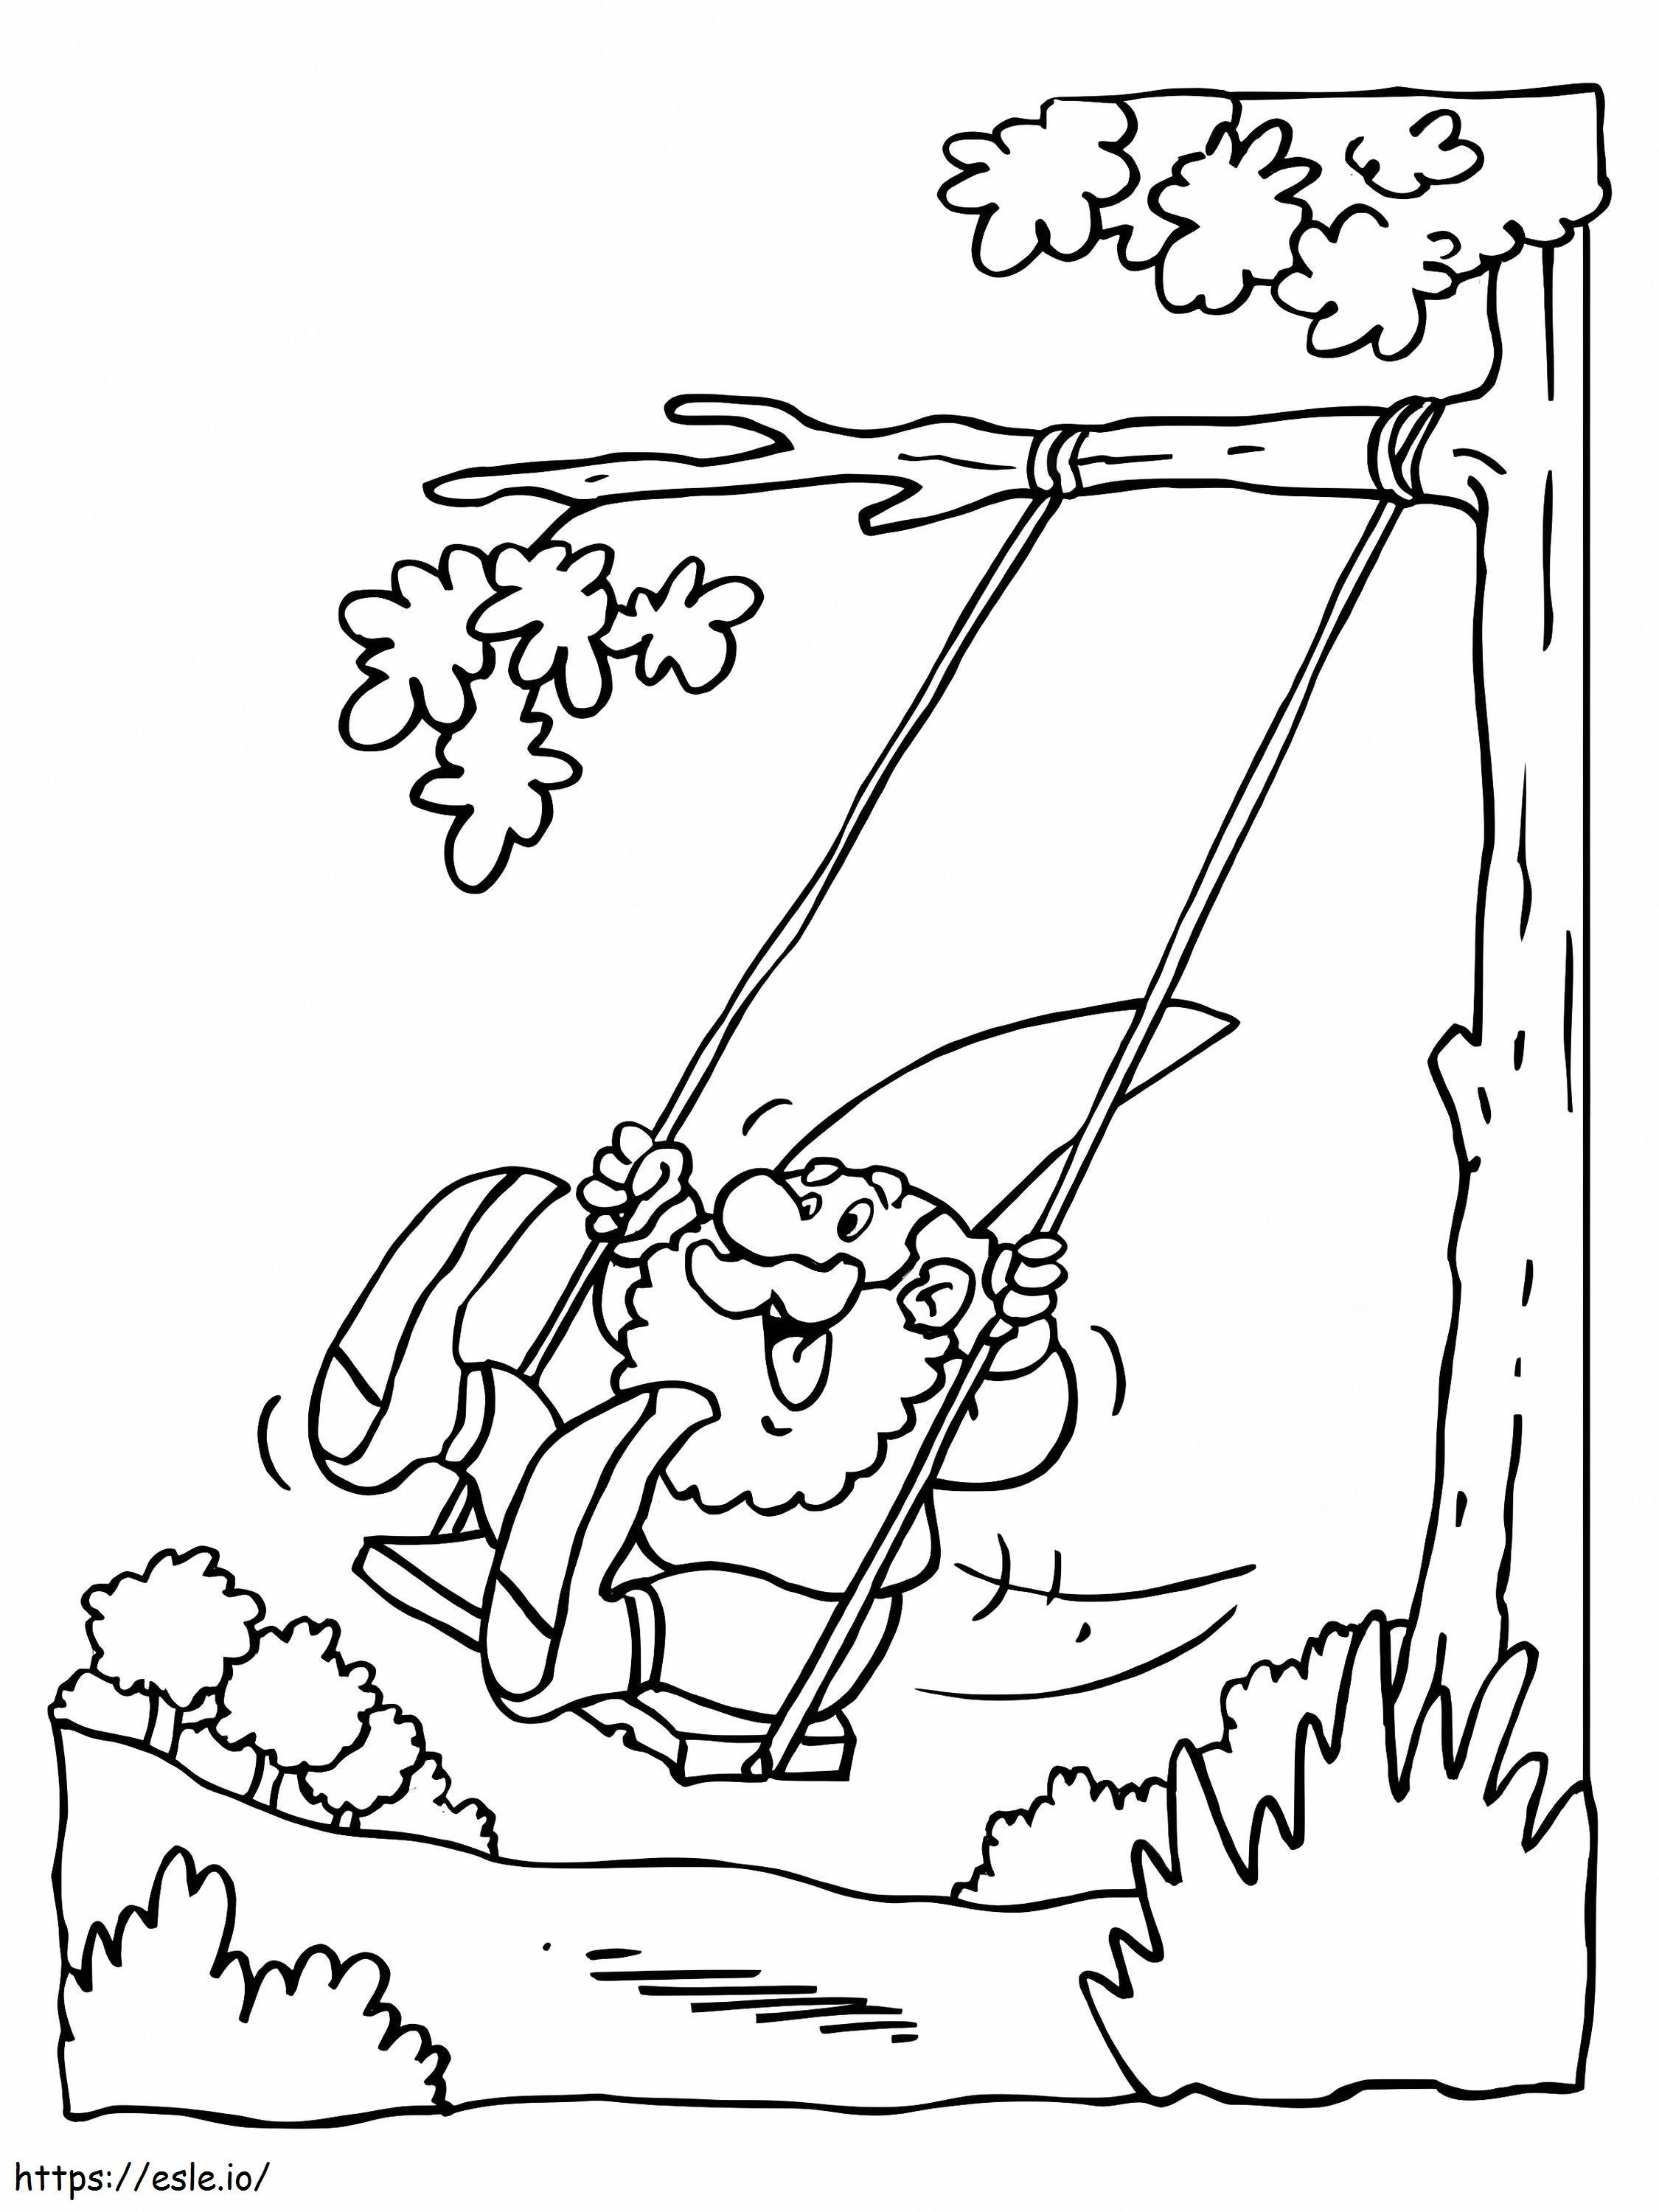 Gnome On A Swing coloring page